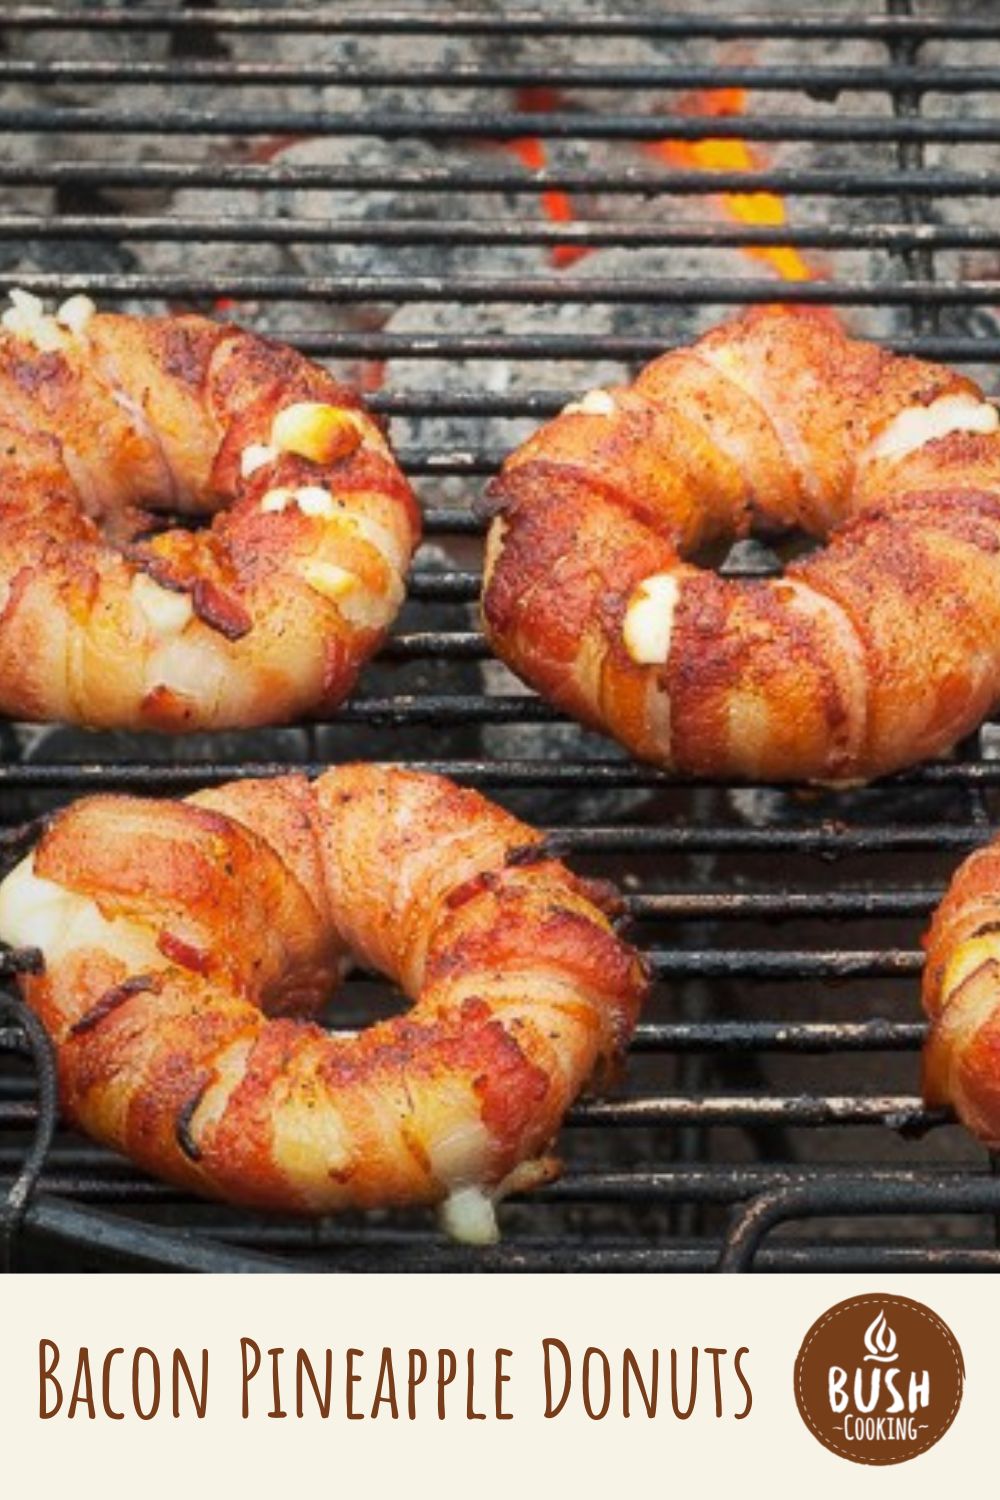 Bacon Pineapple Donuts | Bush Cooking